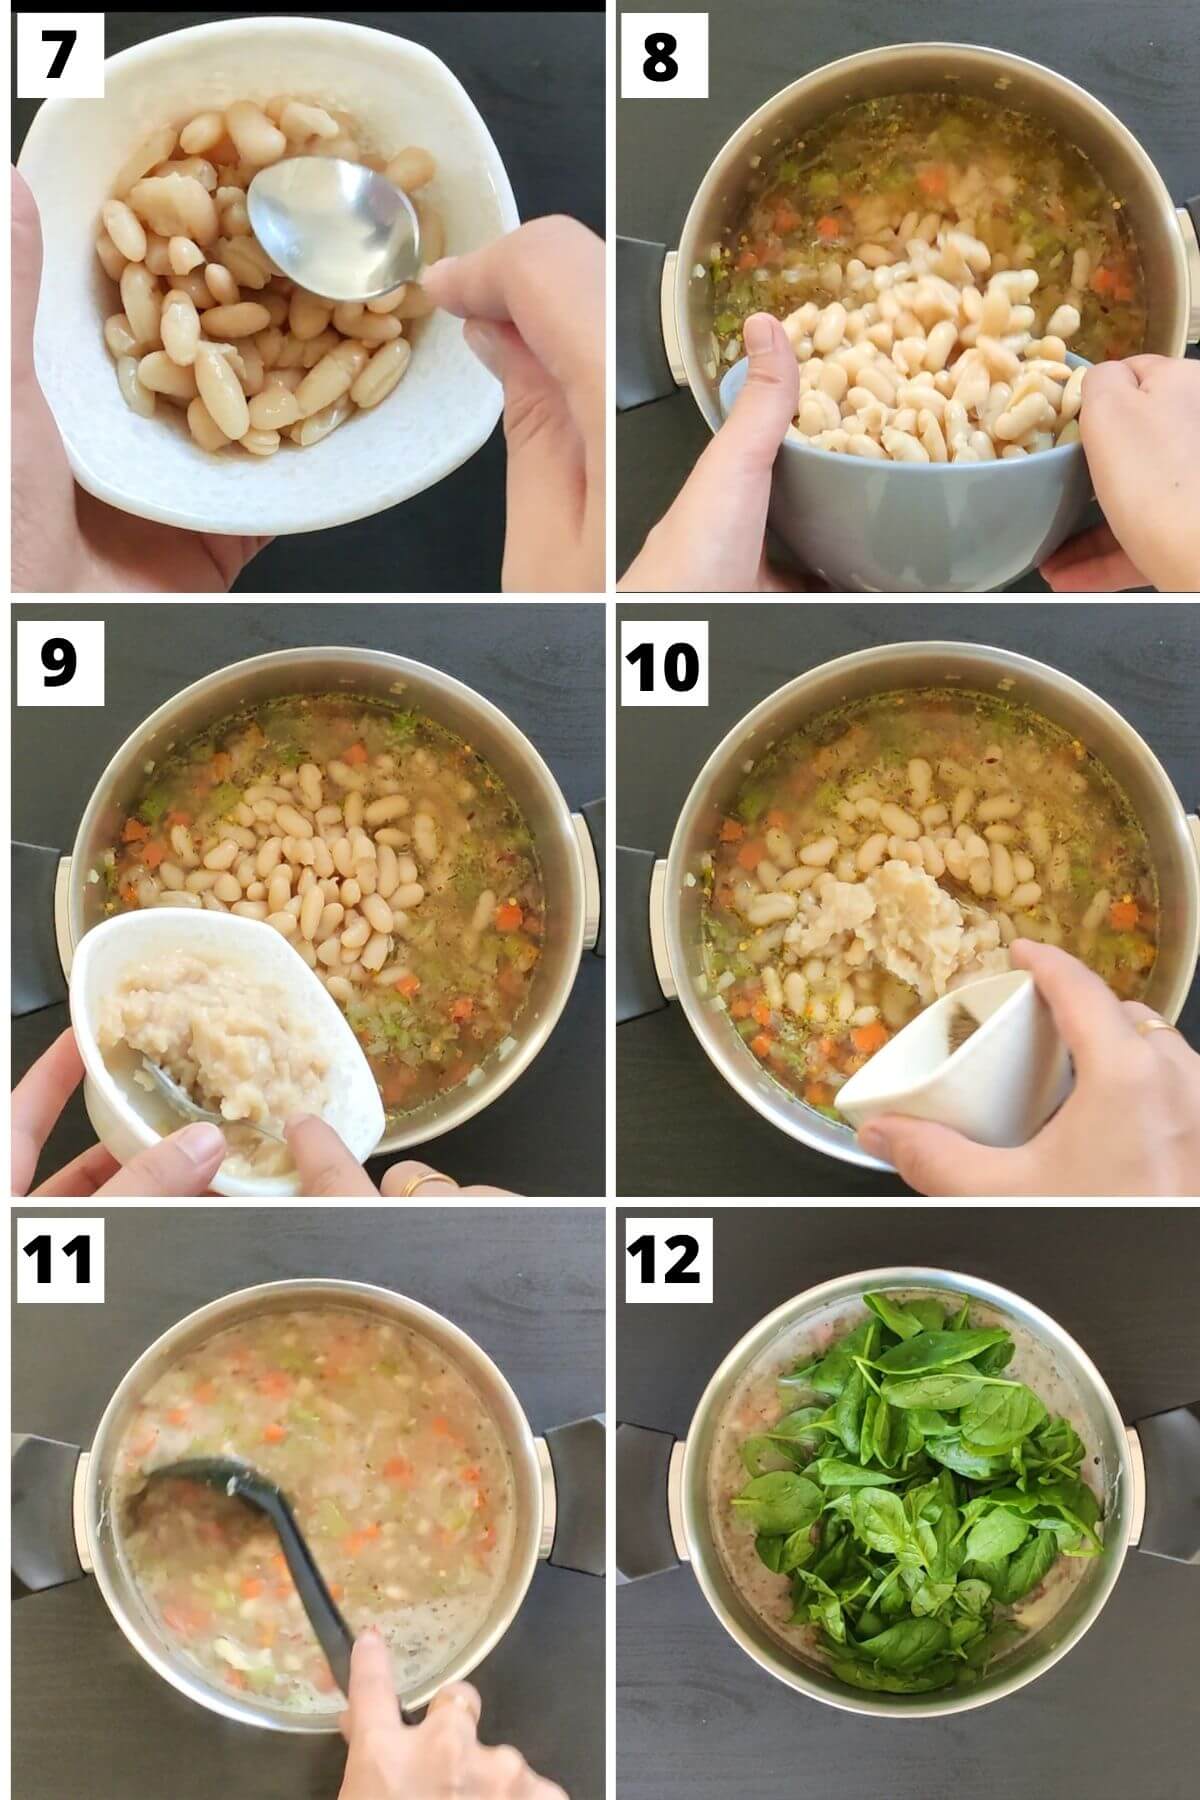 Collage of steps 7 to 12 of cannellini bean soup recipe